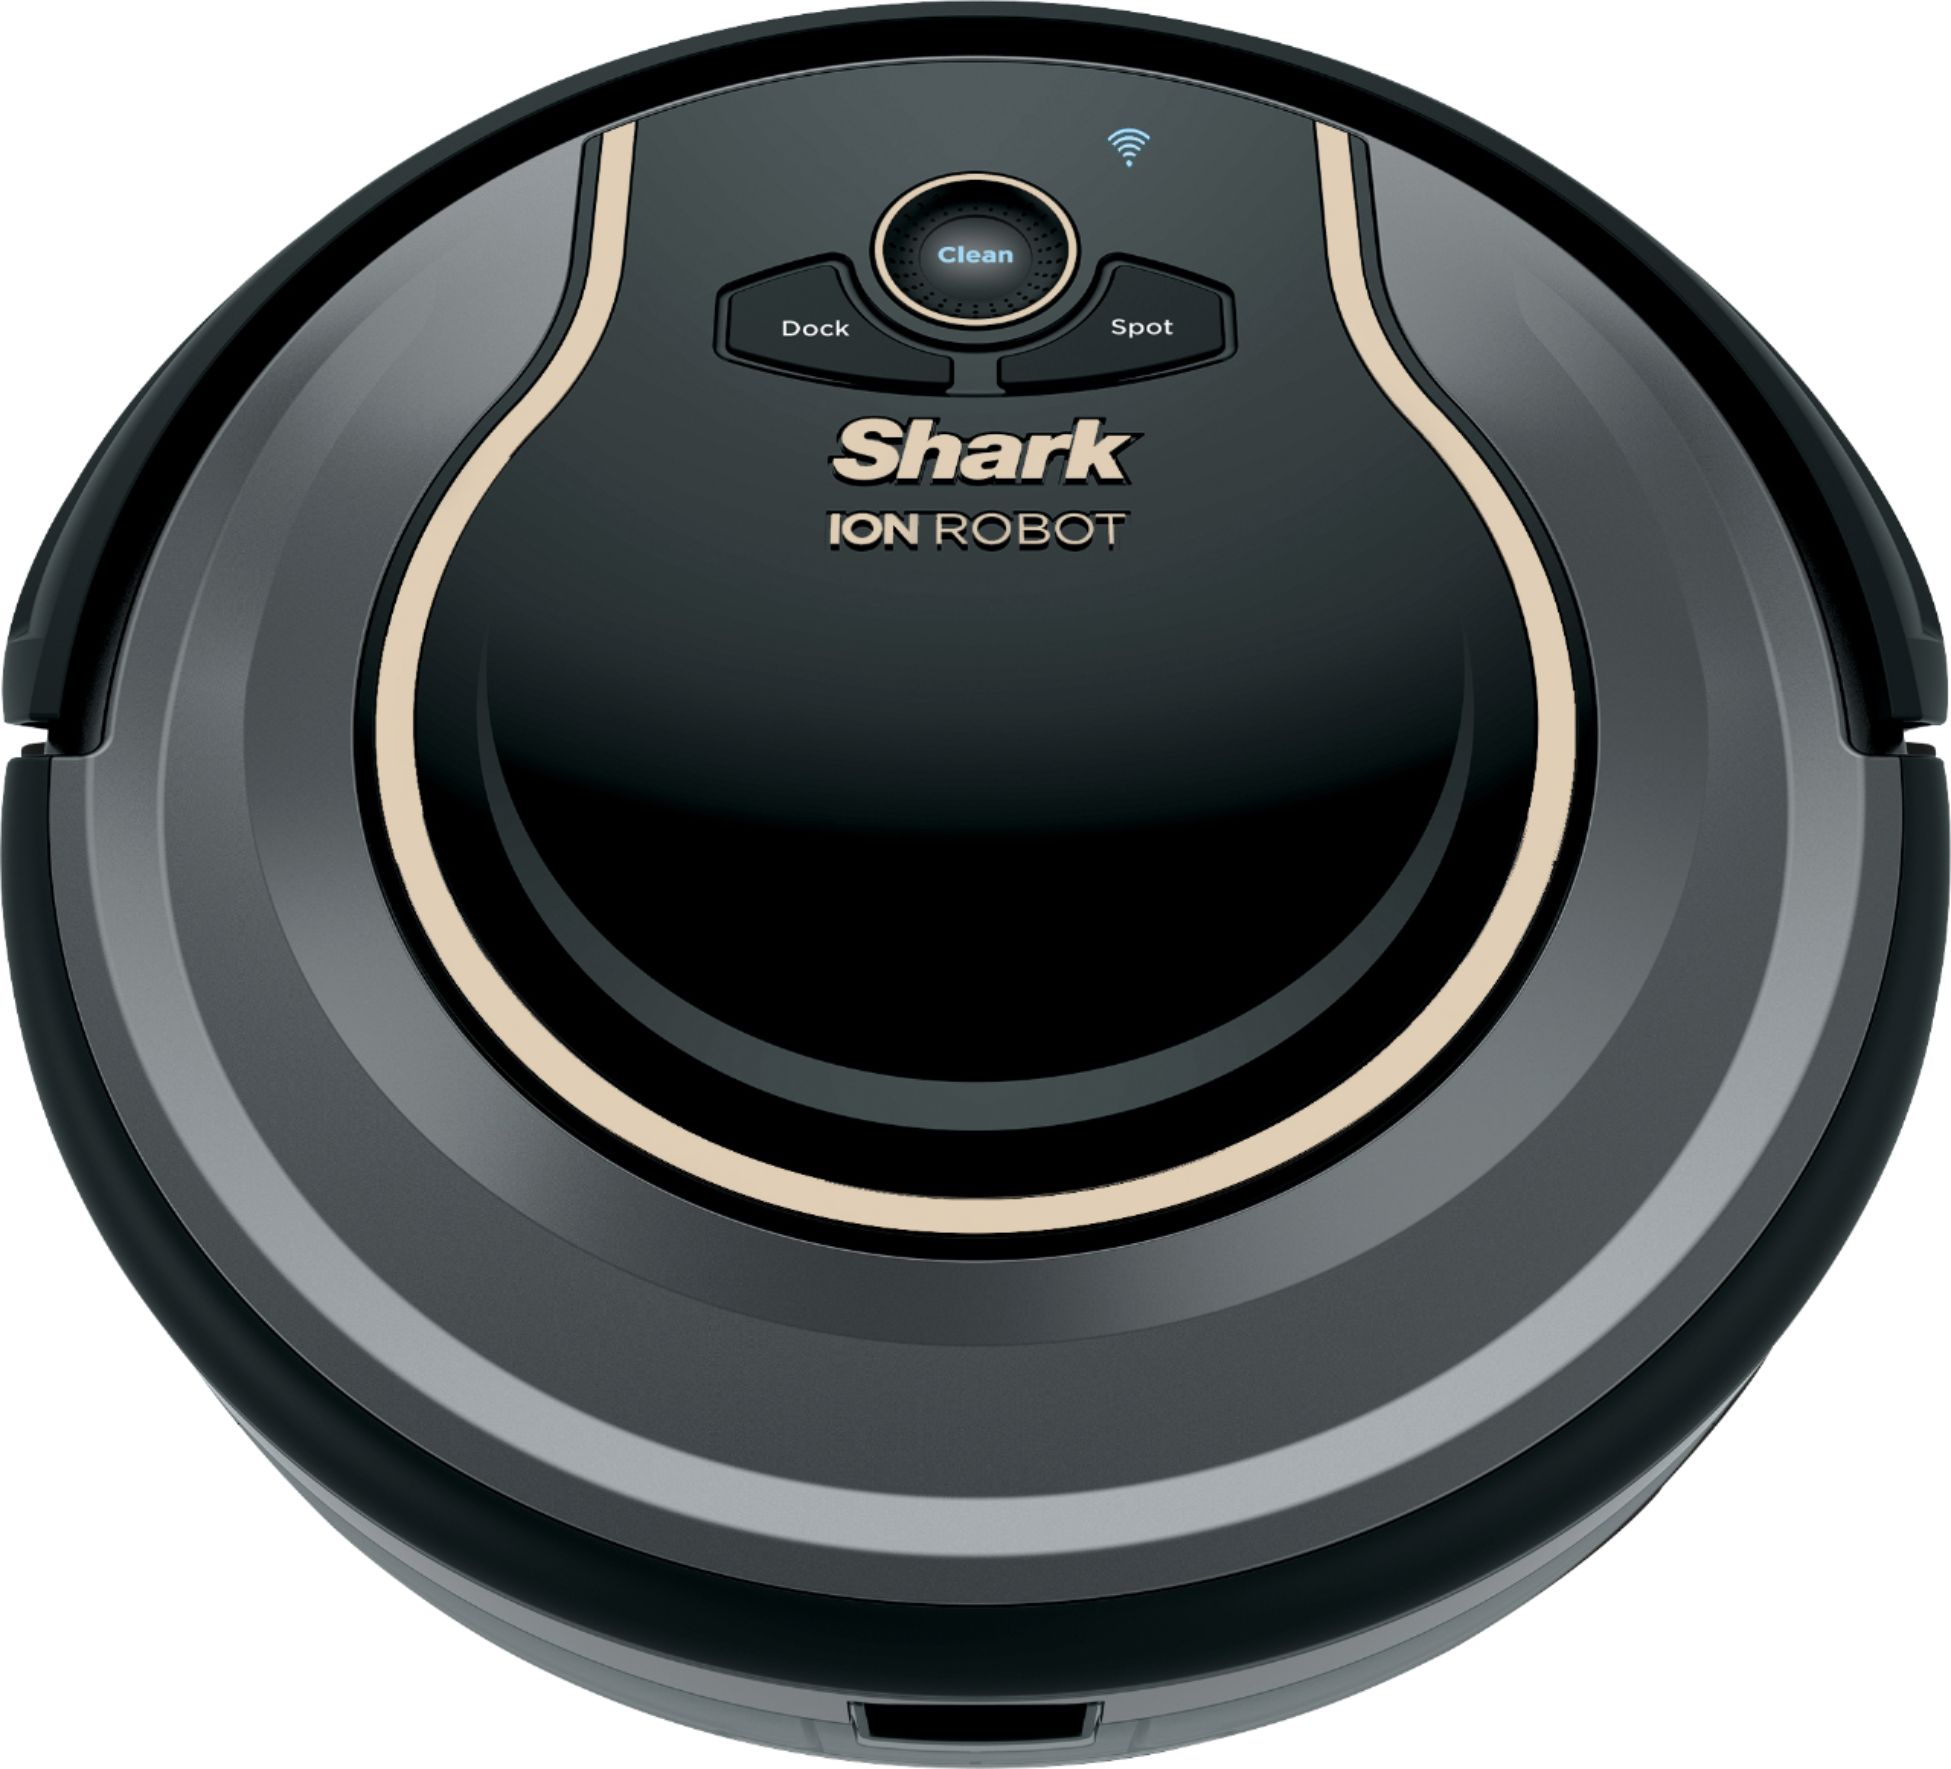 NEW IN BOX Shark ION ROBOT 750 Vacuum w/ WiFi Connectivity RV750 Voice Control 